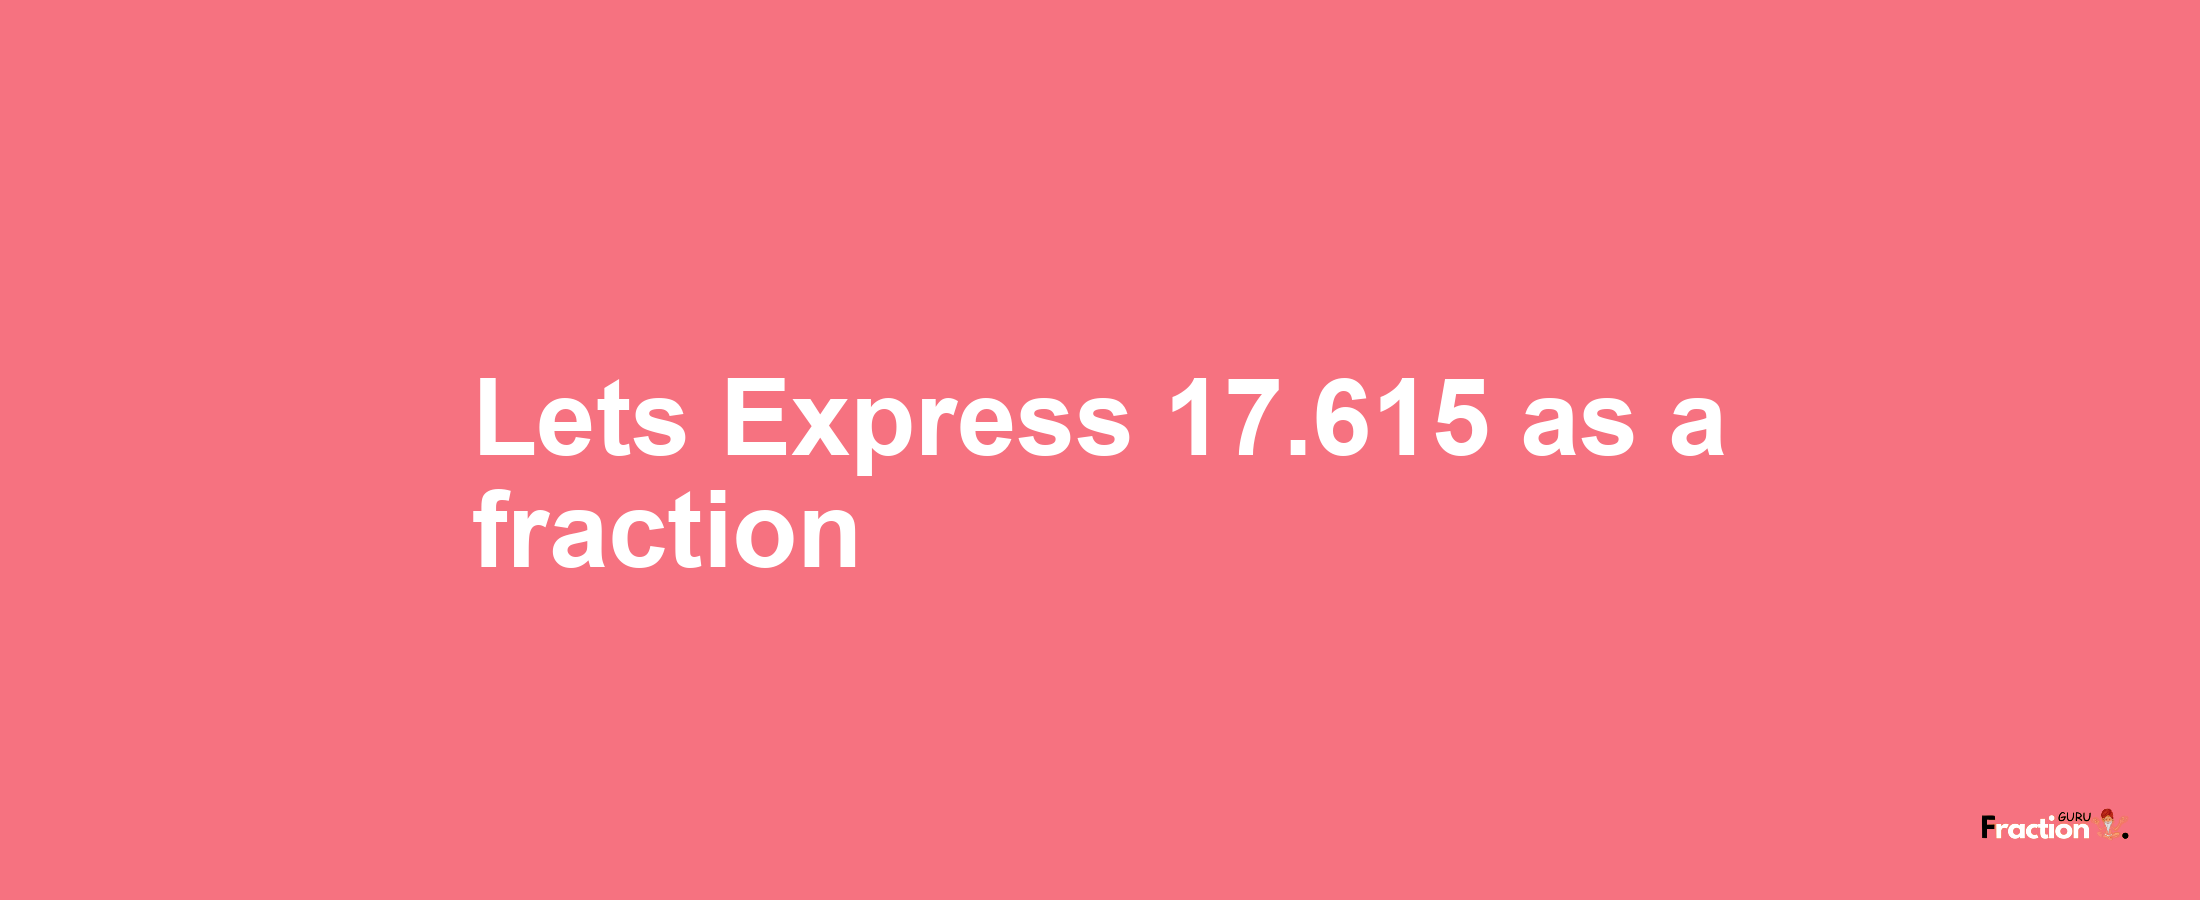 Lets Express 17.615 as afraction